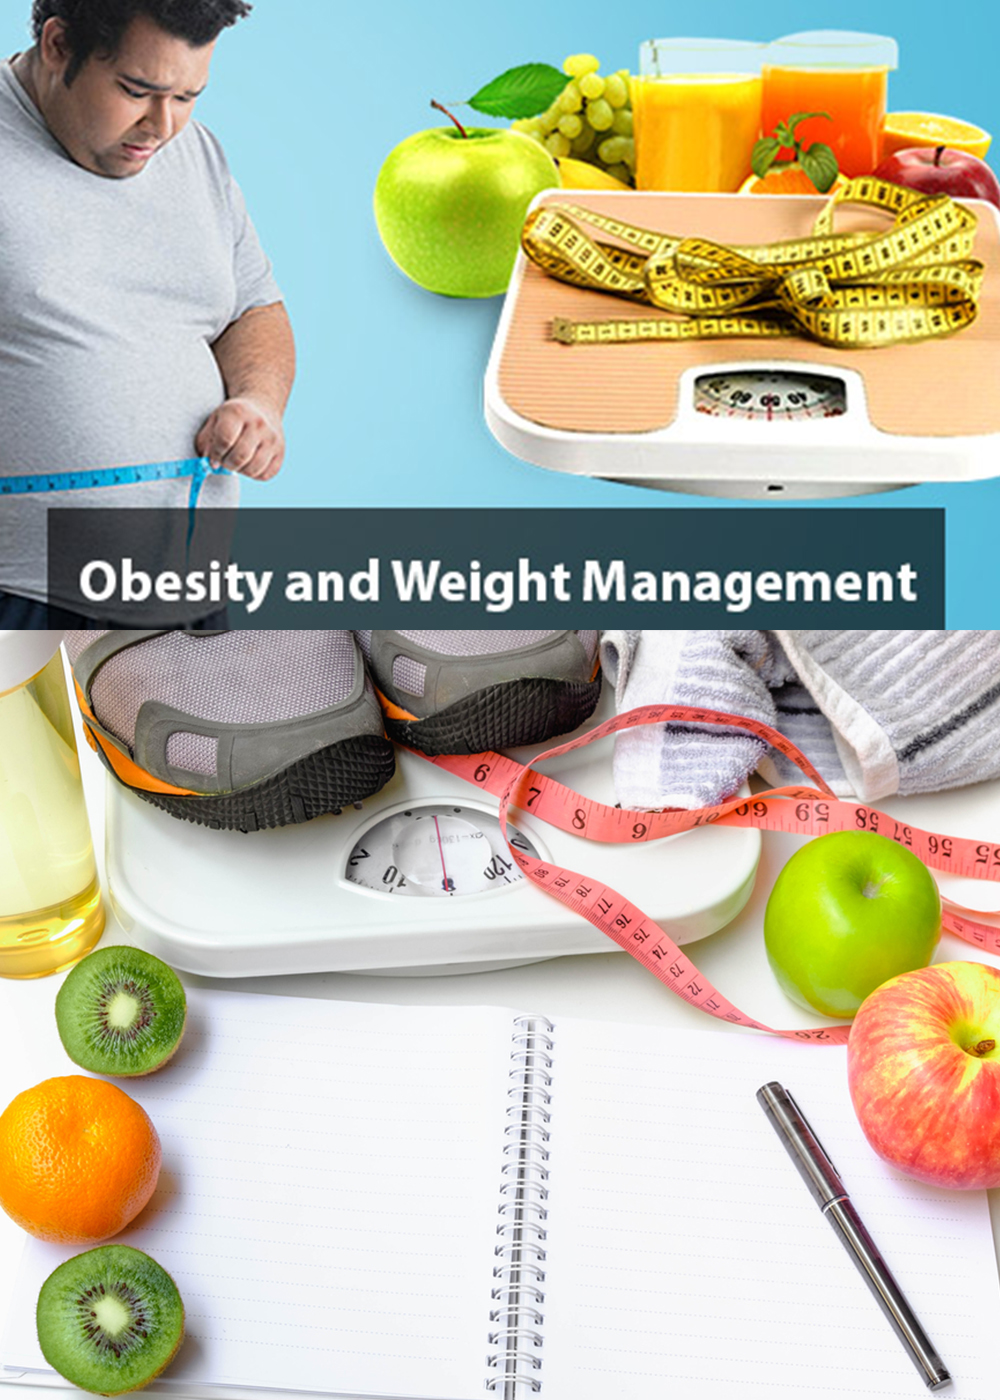 Obesity and weight management